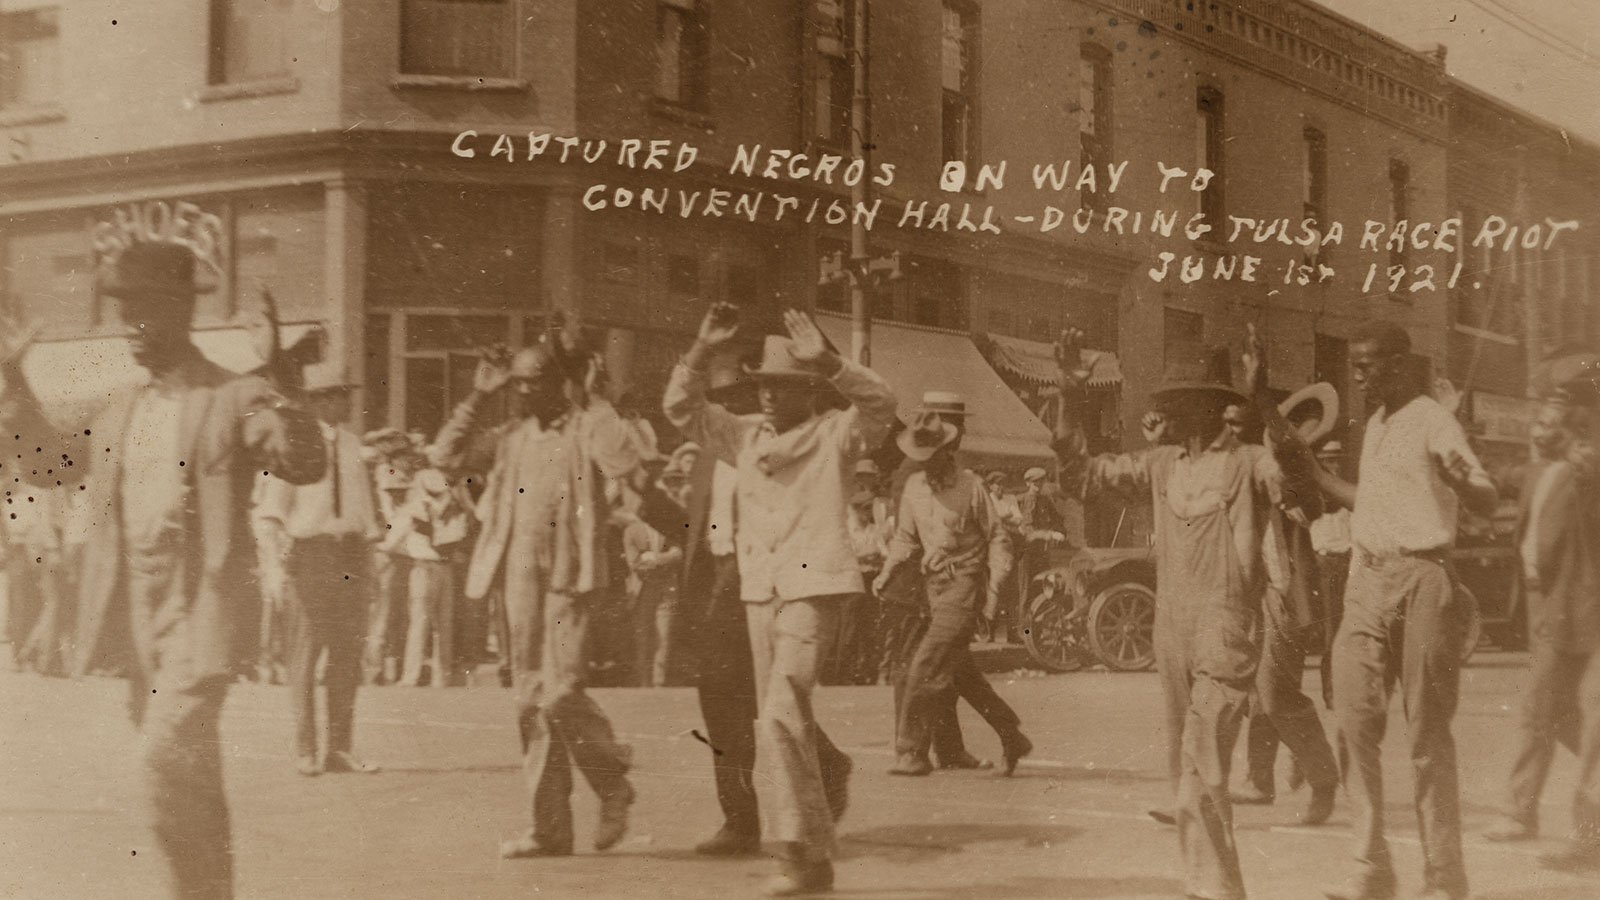 'Captured Negros on Way to Convention Hall - During Tulsa Race Riot, June 1st, 1921'